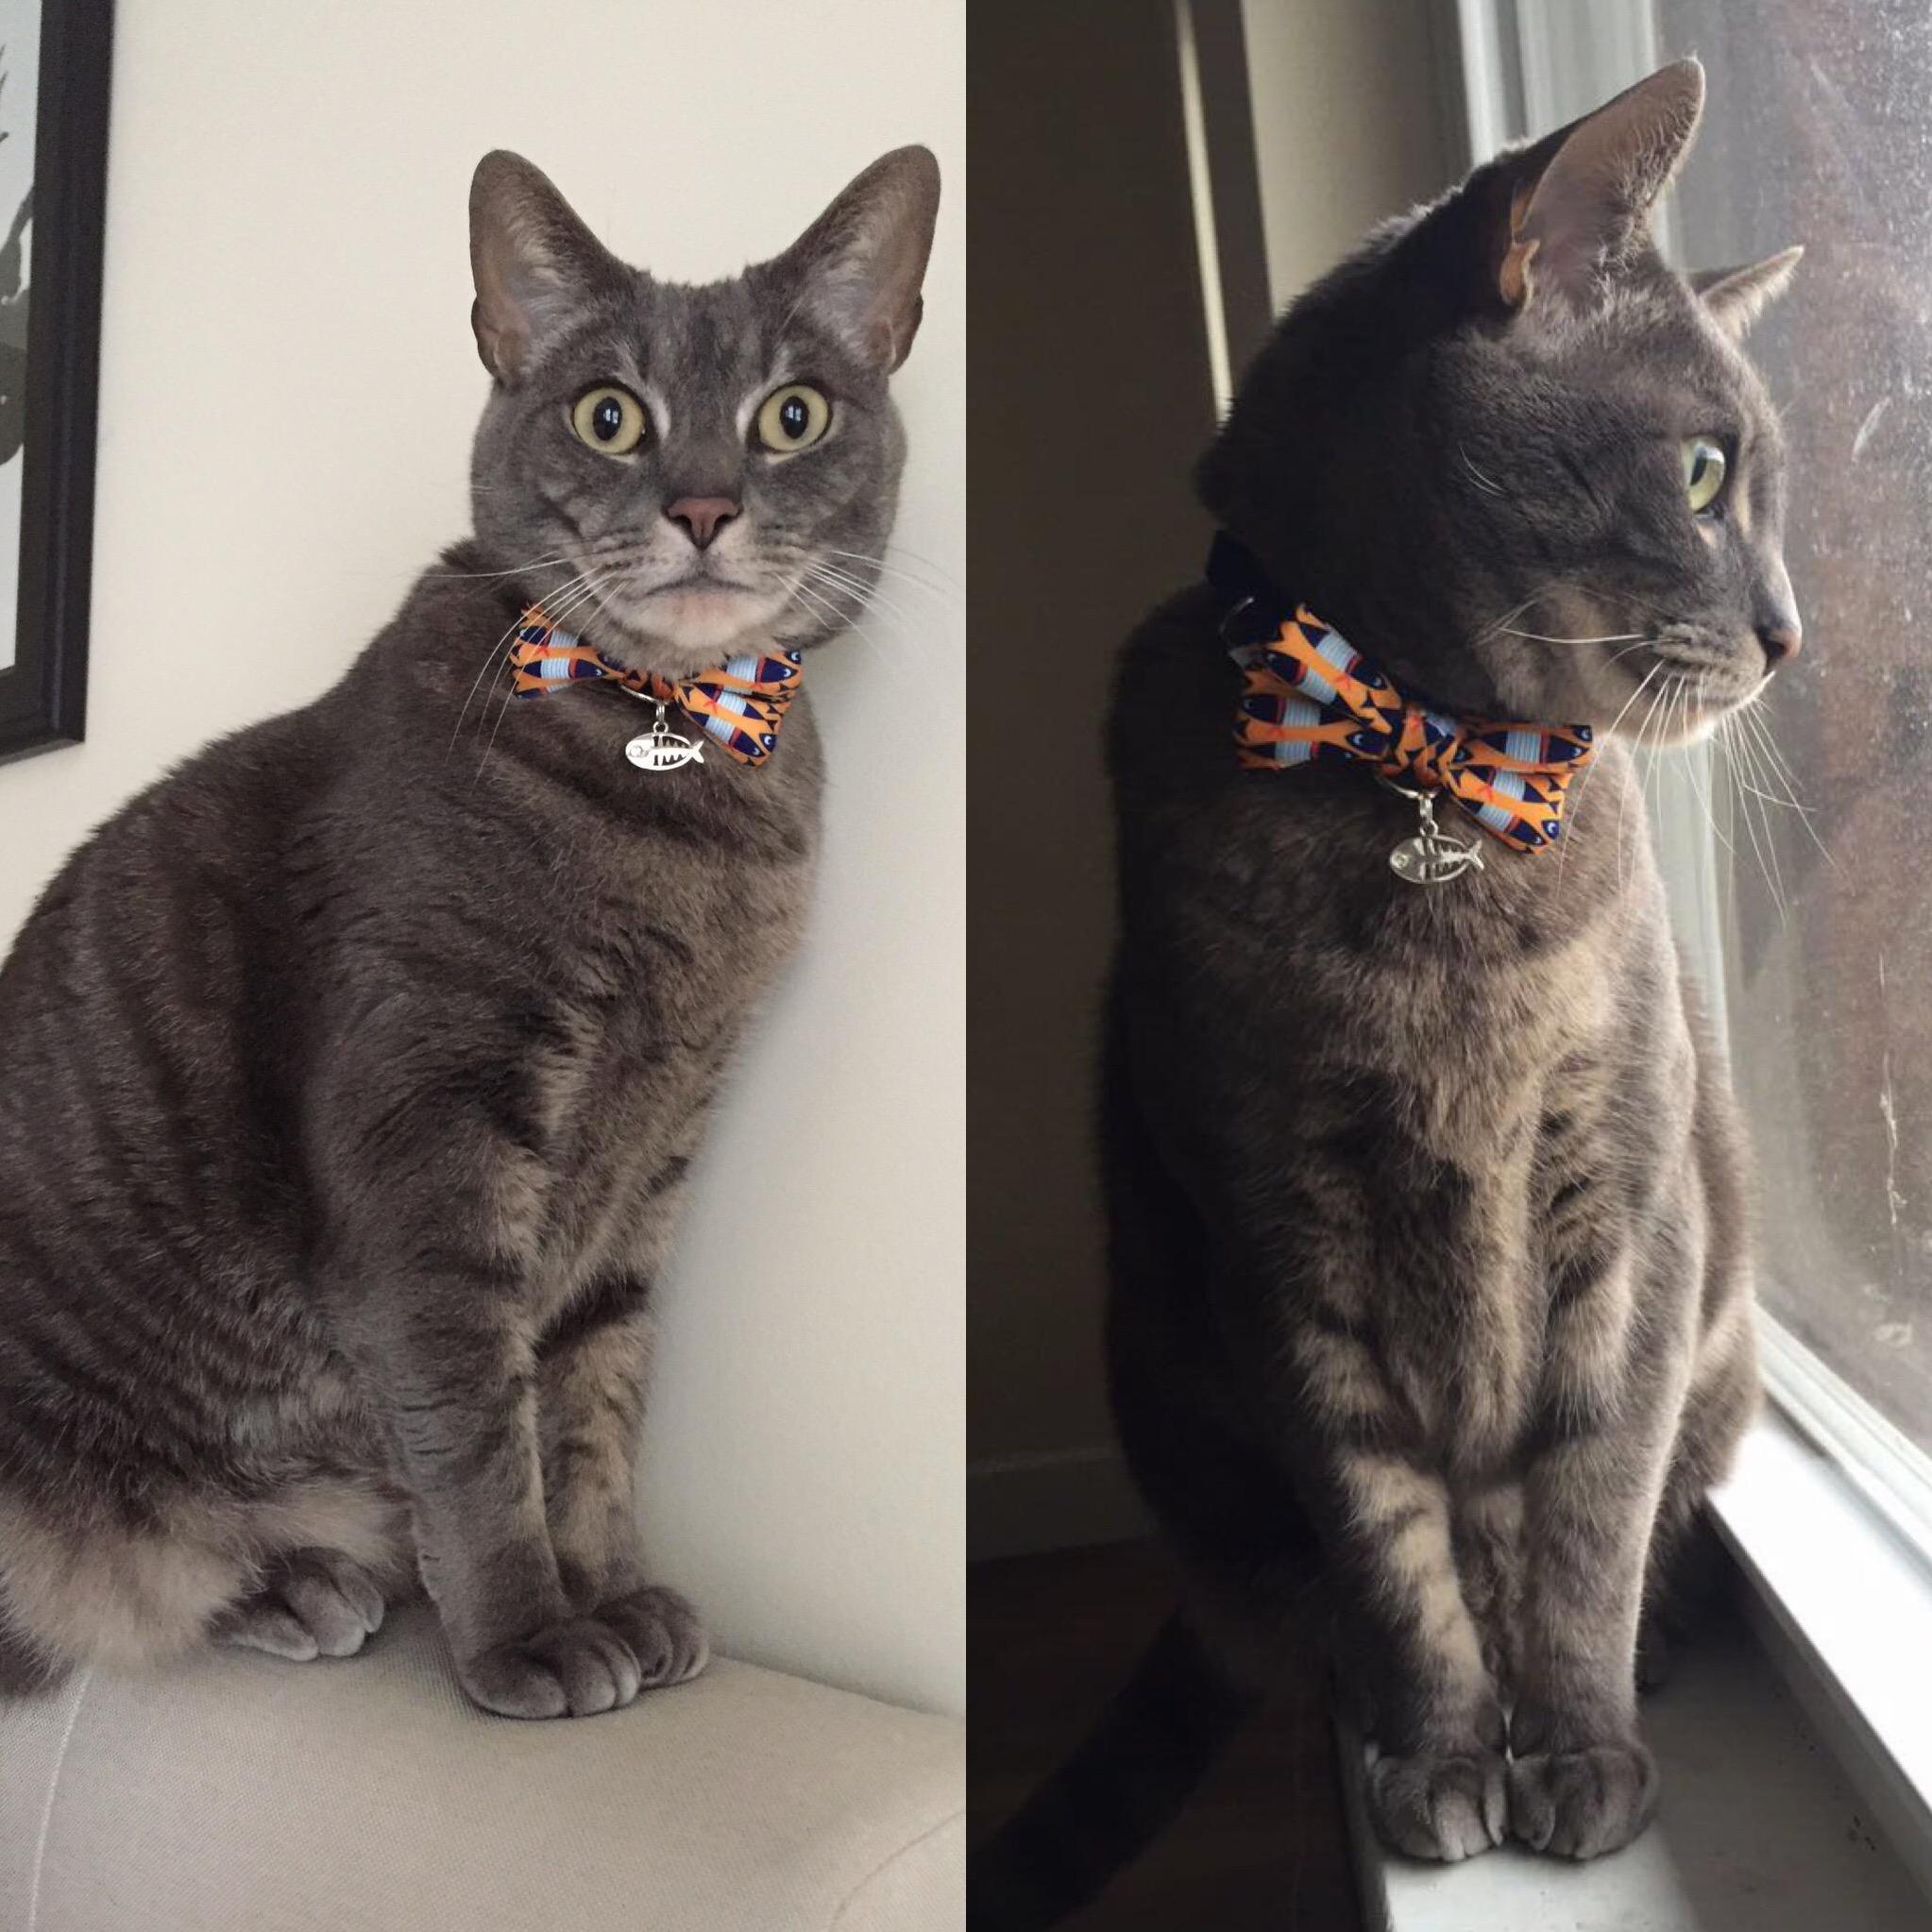 Charlie got a new bow tie today